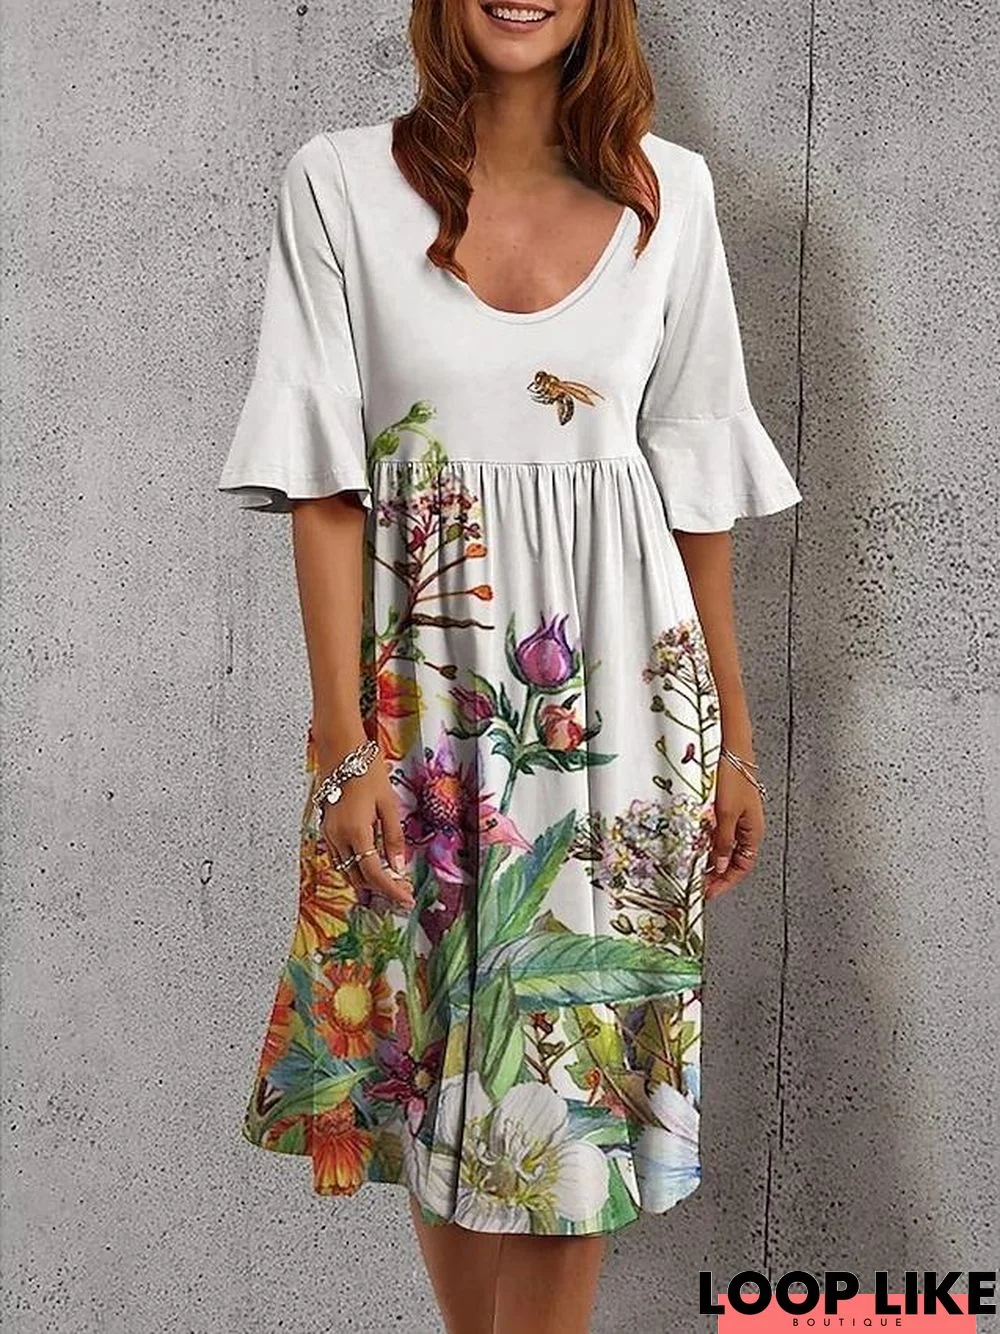 Women's Shift Dress Knee Length Dress White Black Blue Red Yellow Green Brown Rainbow Half Sleeve Floral Print Spring Summer V Neck Casual